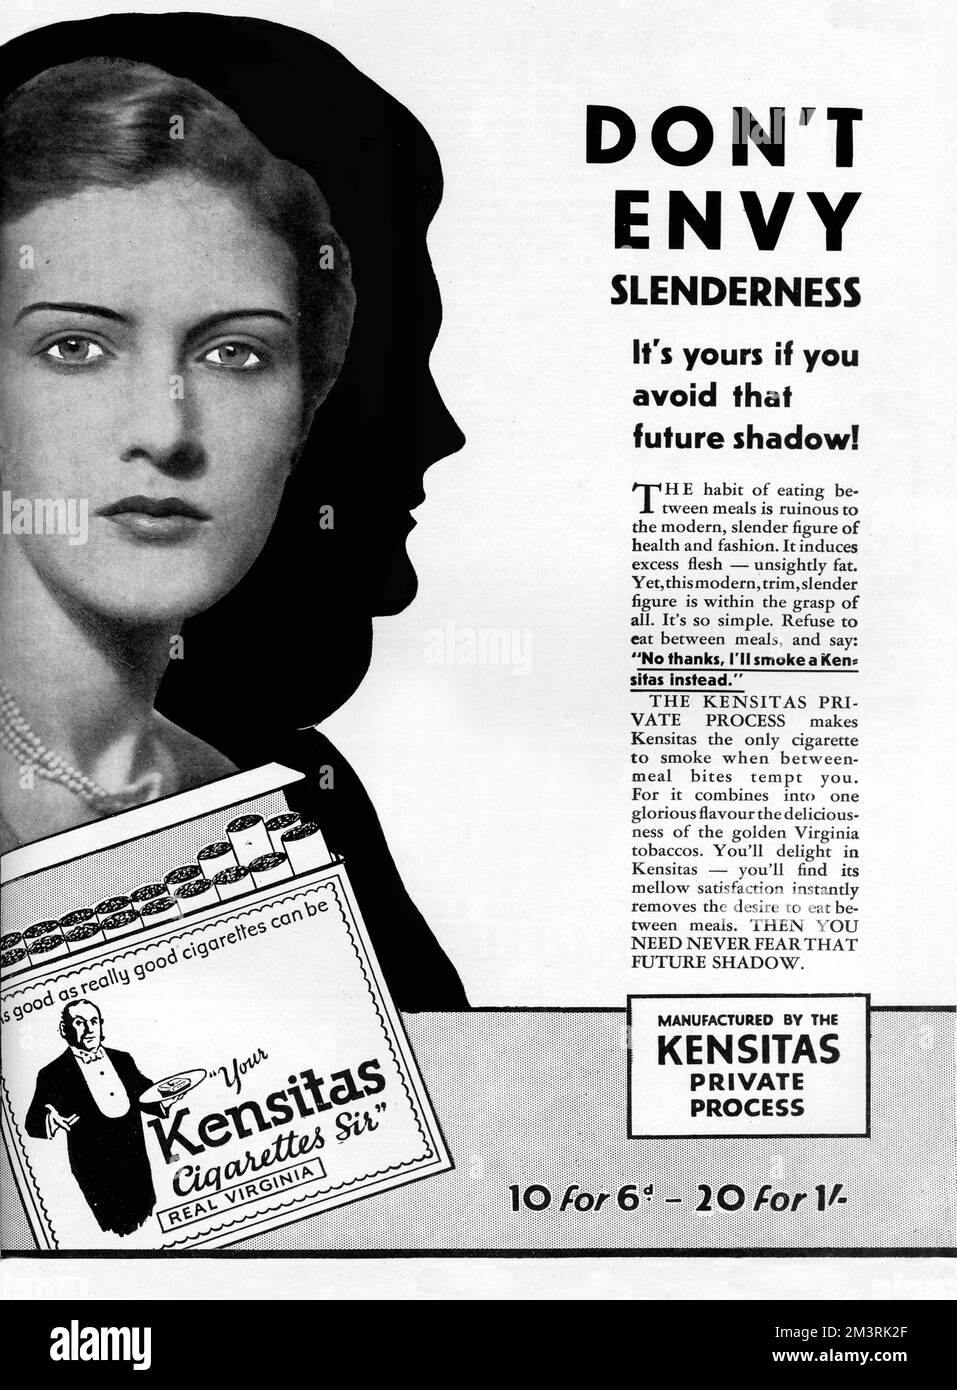 Advertisement for Kensitas cigarettes advising that the best way to avoid eating between meals, gaining 'unslightly fat' and avoiding the future shadow (that of a portly older woman) is to smoke a Kensitas cigarette.    1929 Stock Photo